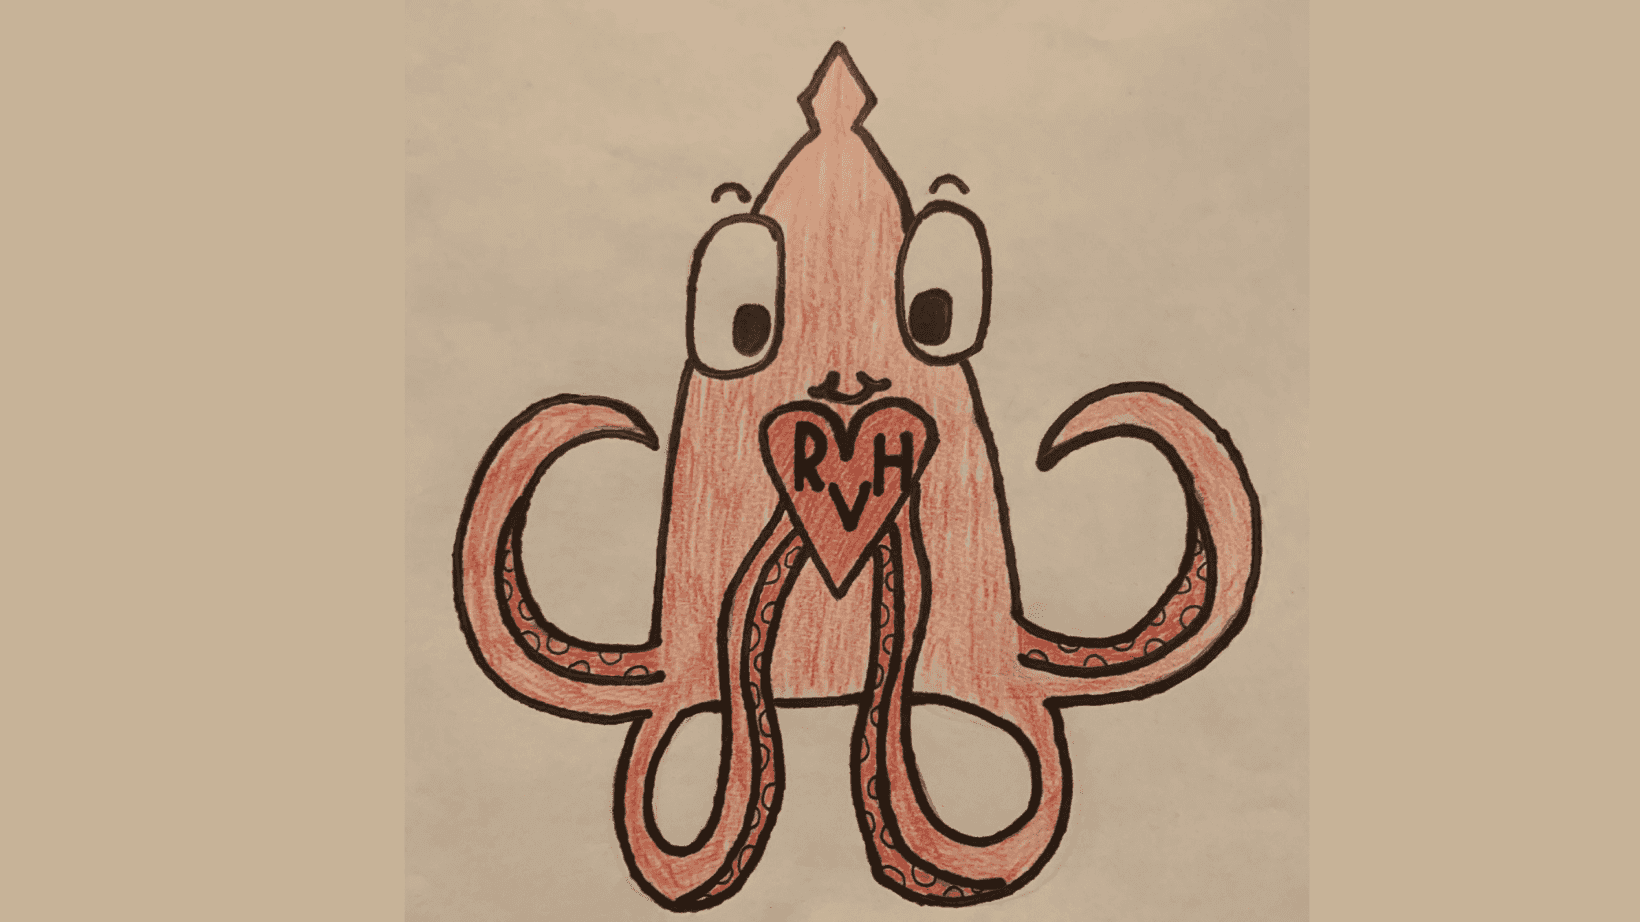 Vote for: Squid Love by Eliot, Age 10